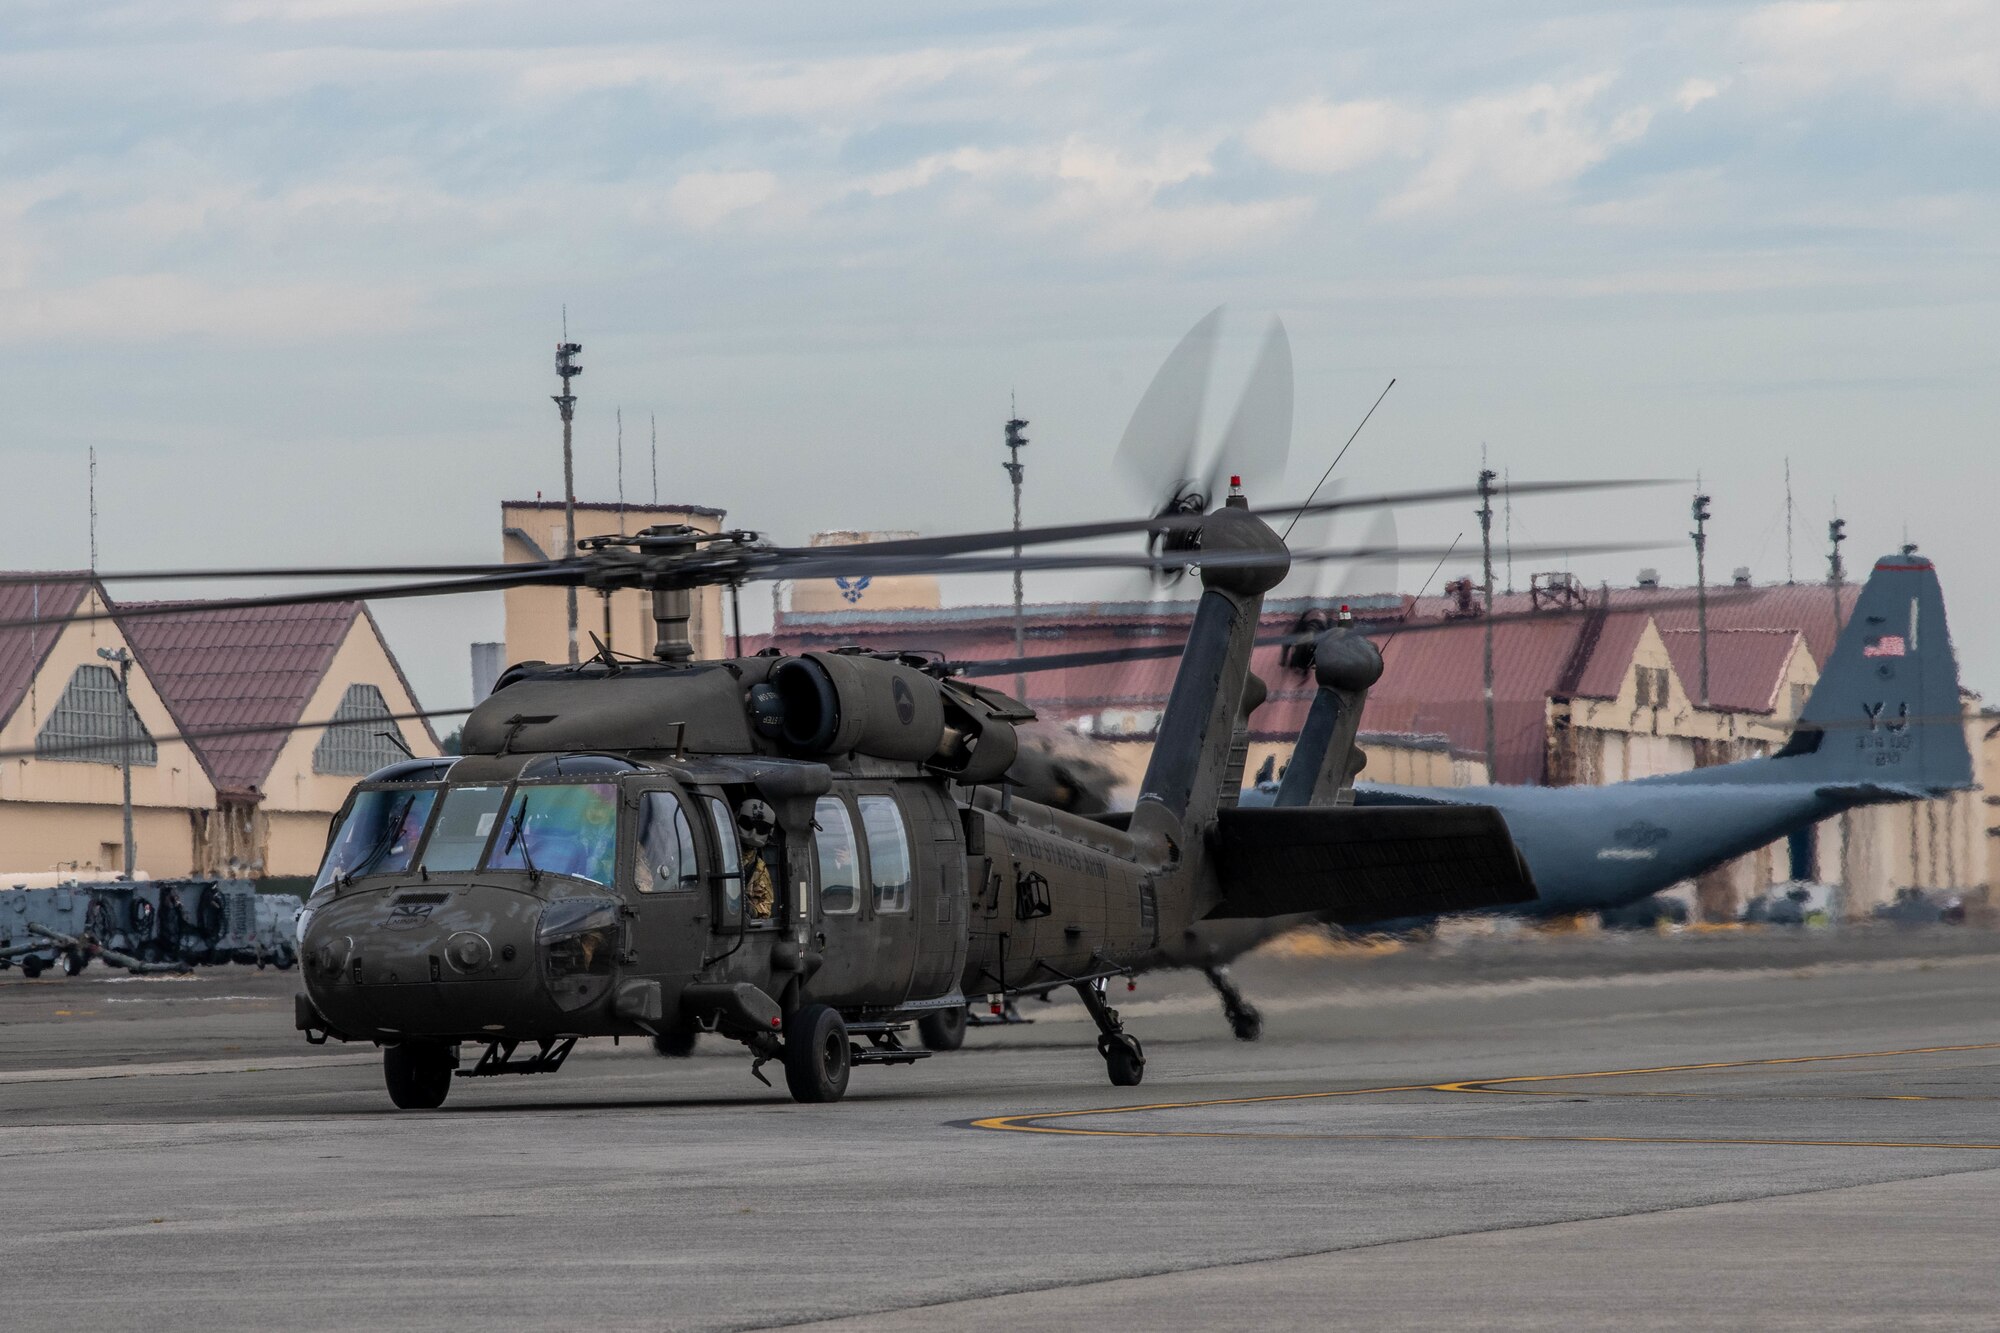 UH-60 Black Hawk helicopters taxi down a flightline